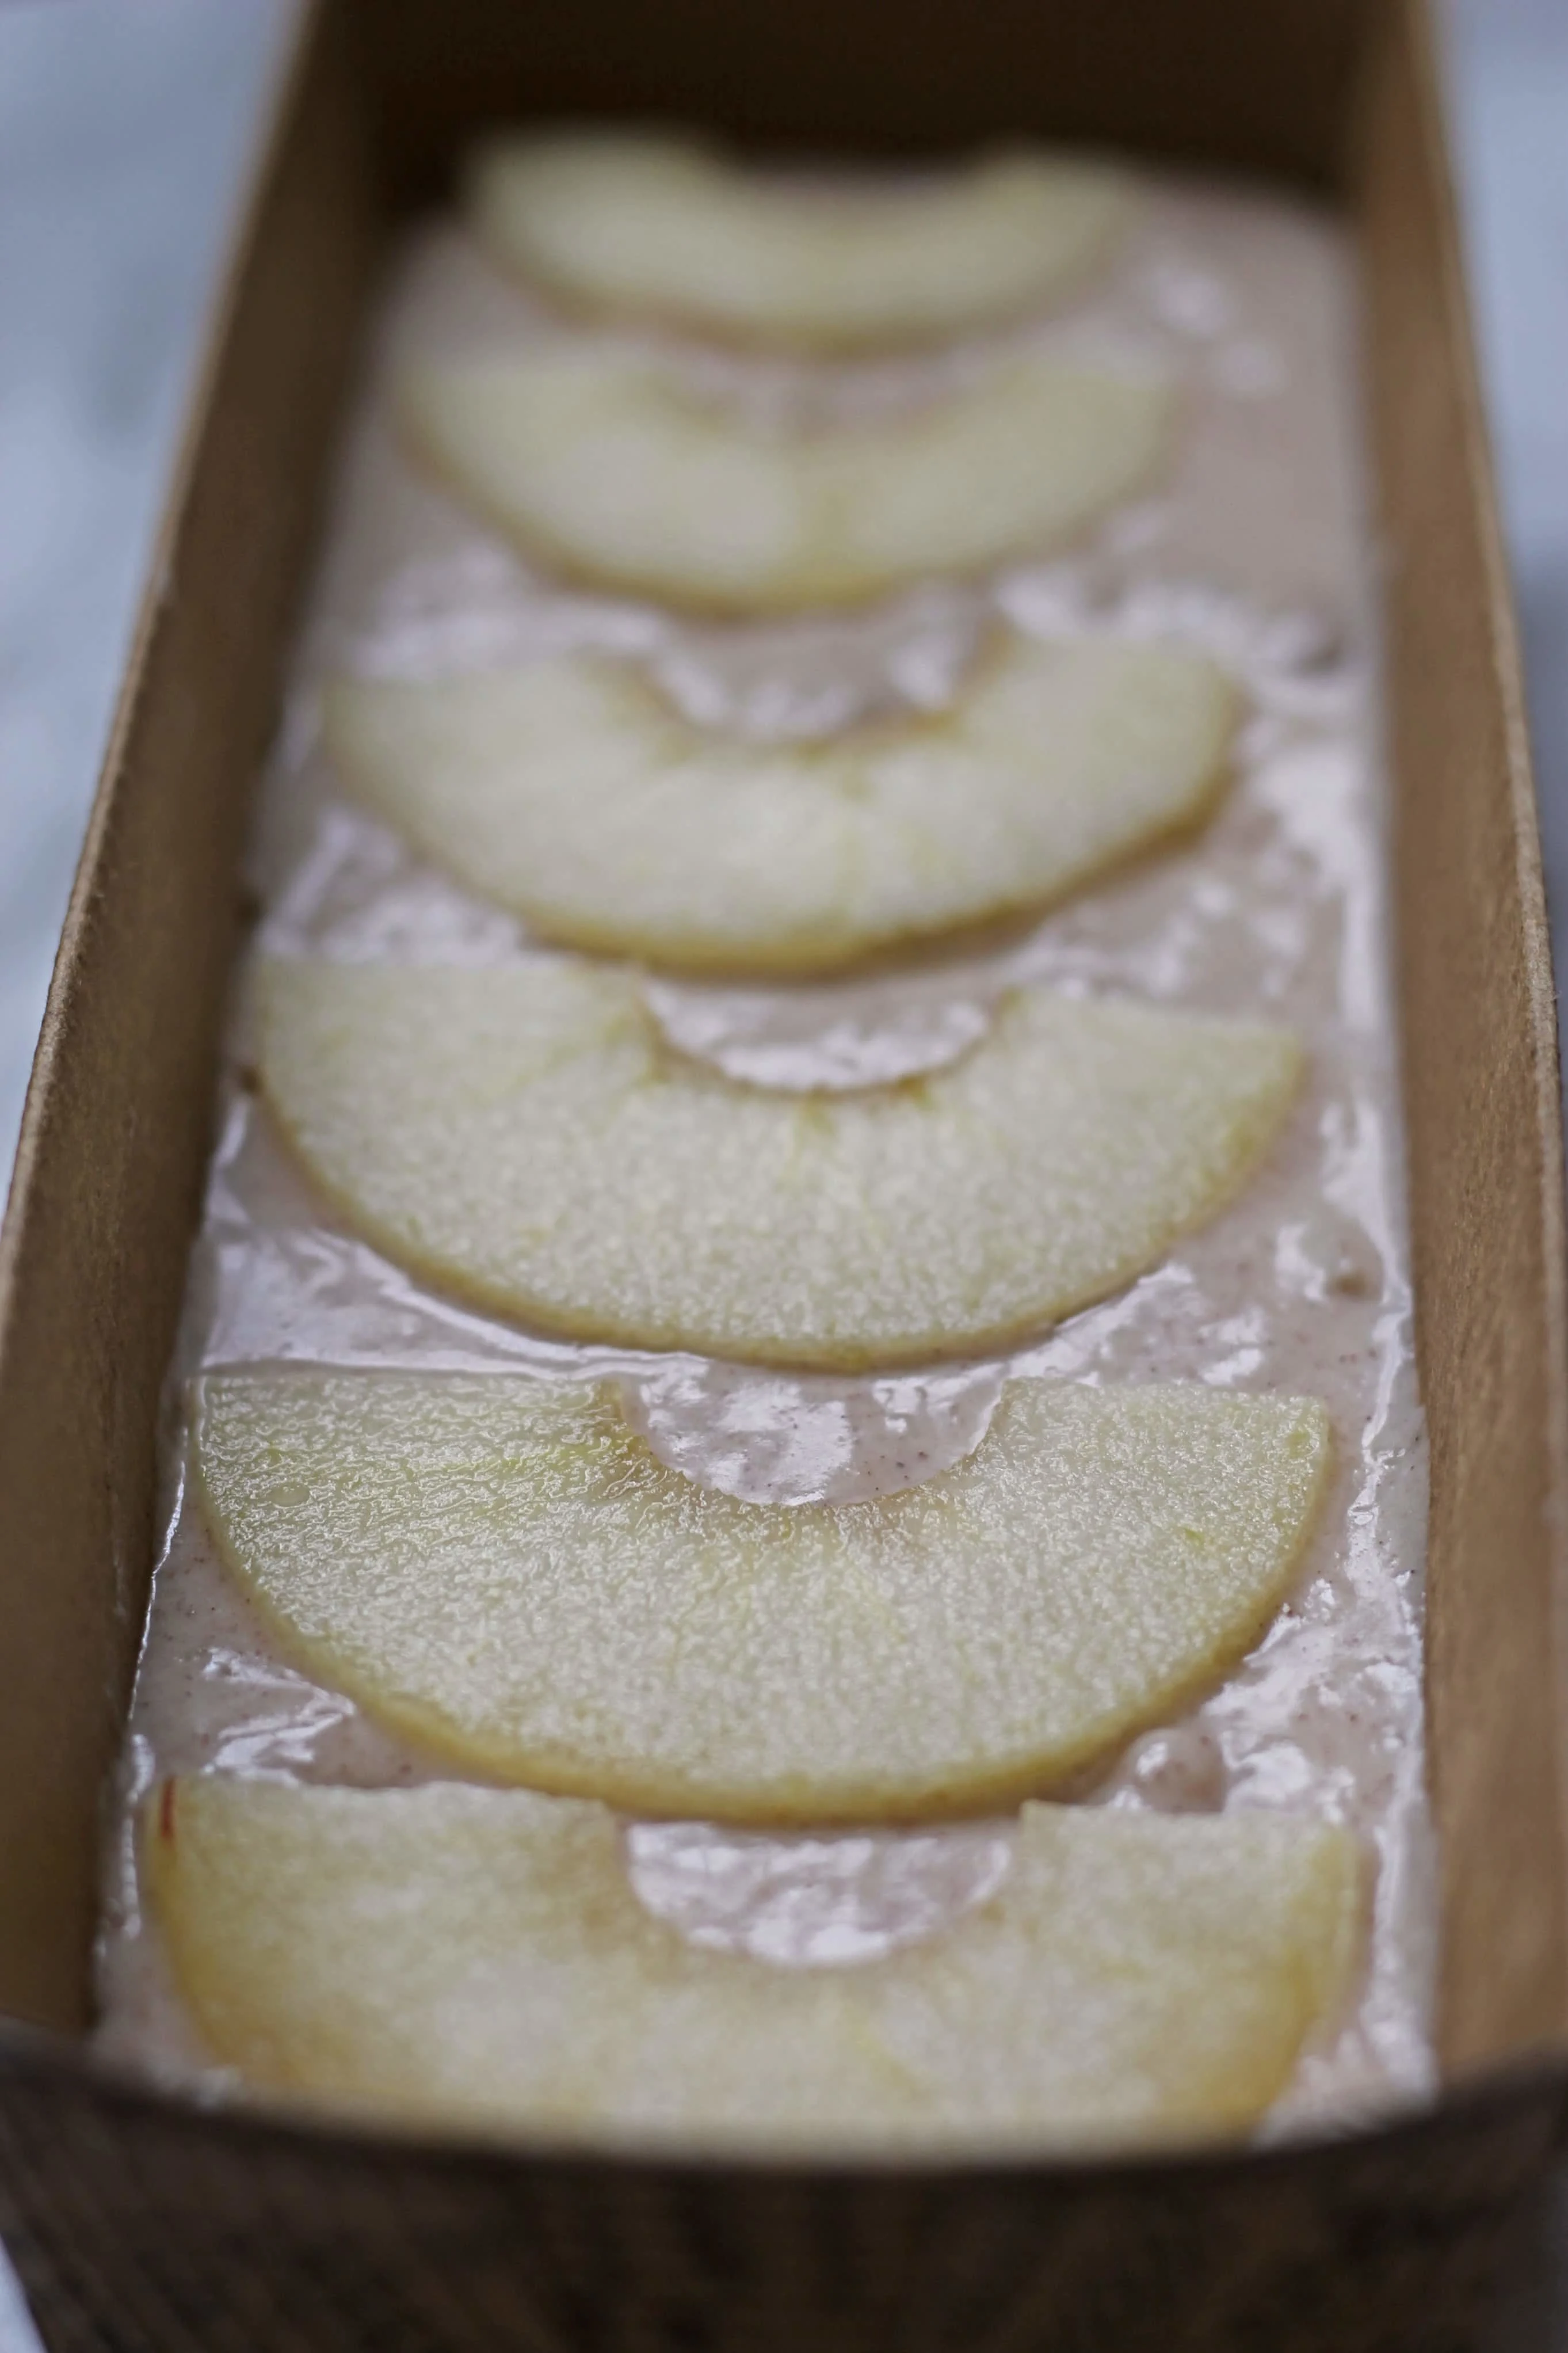 Baking pan with apple cake batter topped with thinly sliced apples.